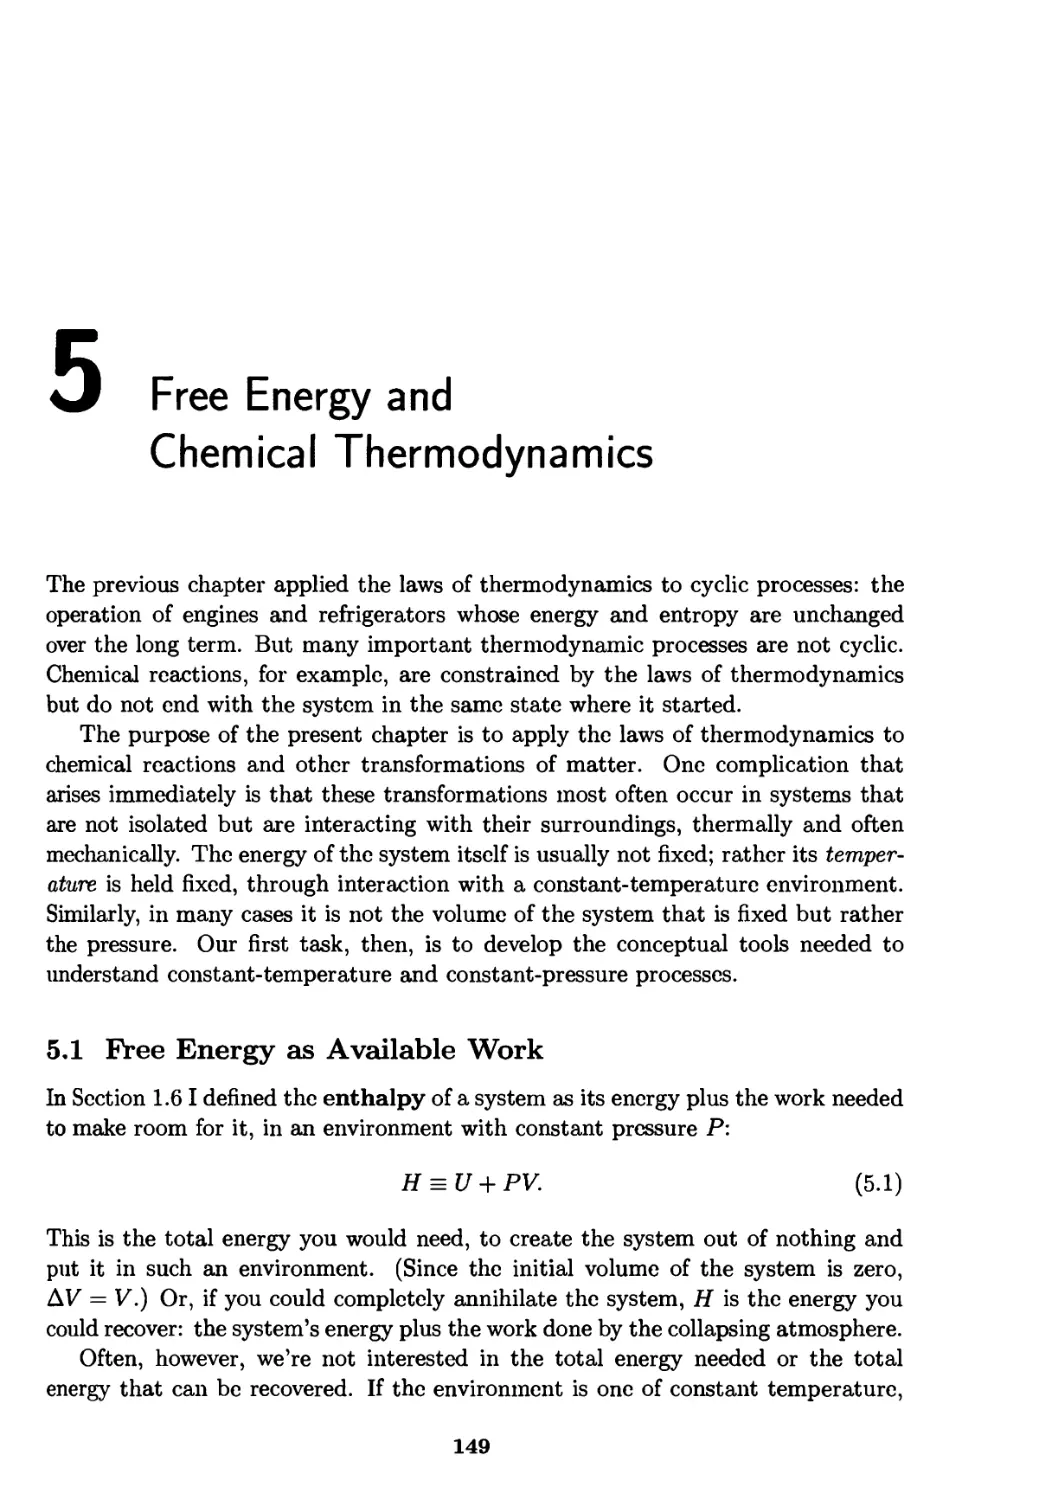 Chapter 5. Free Energy and Chemical Thermodynamics